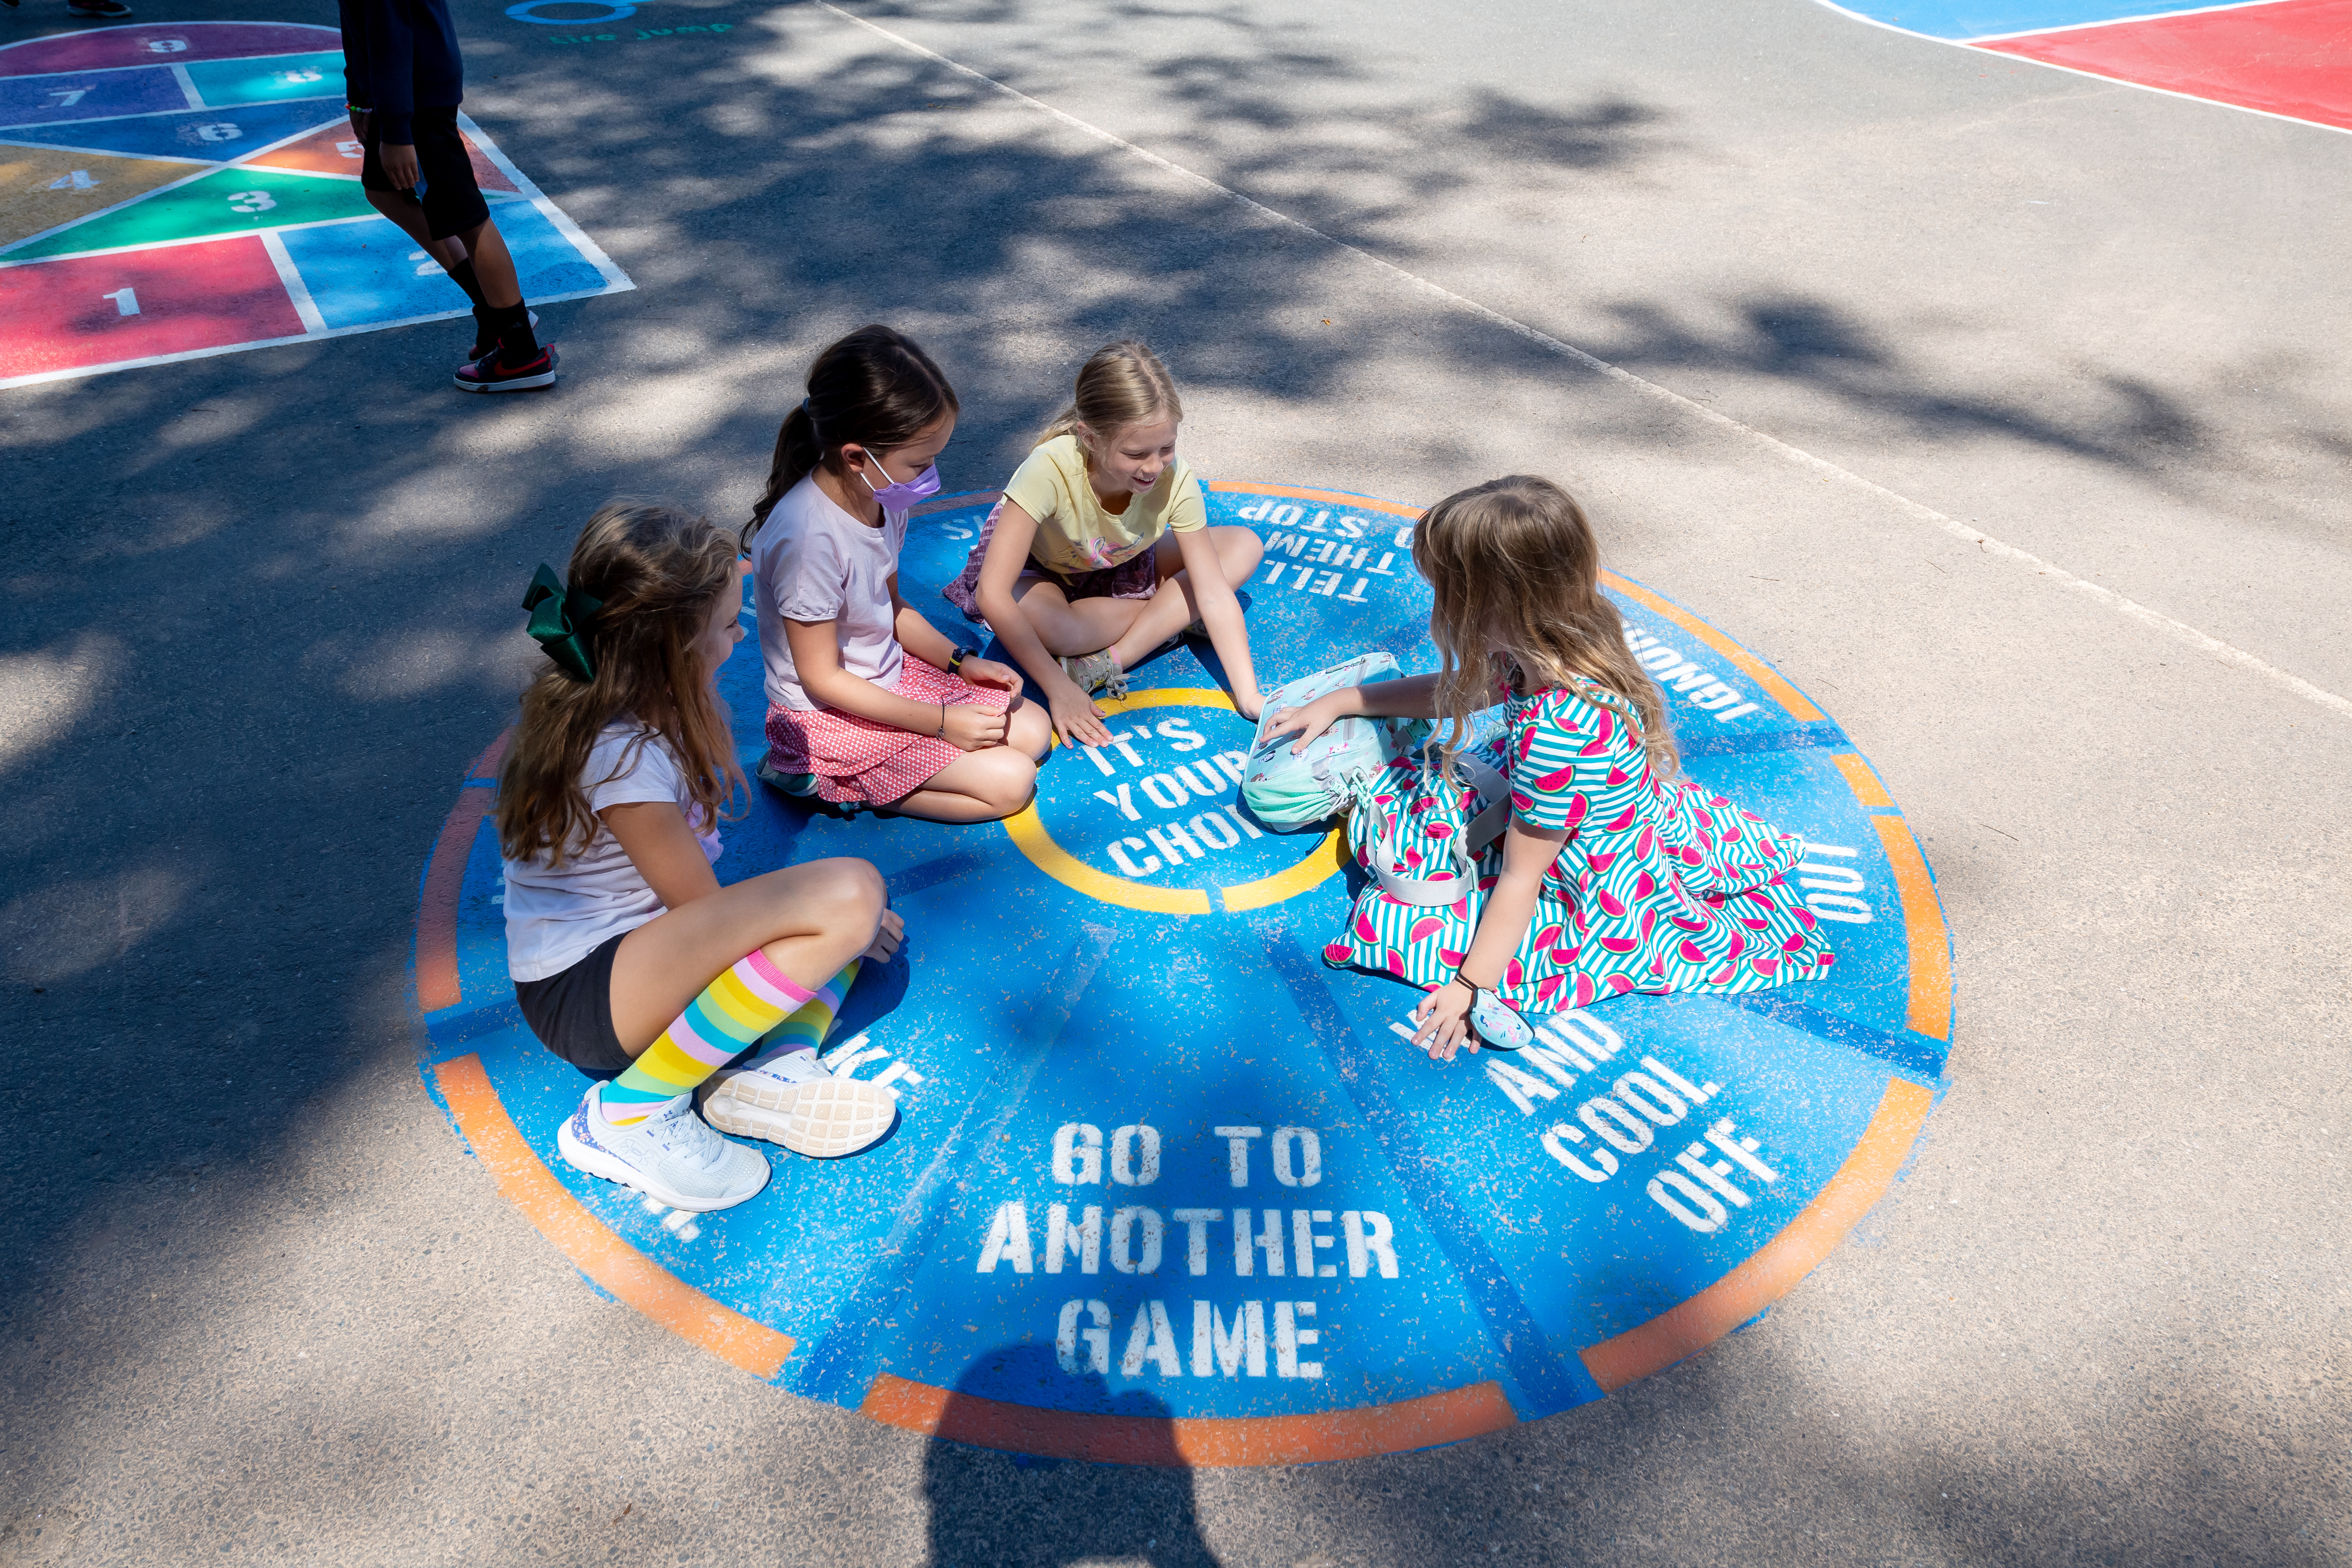 The conflict resolution circle outside Beech Tree Elementary School. 